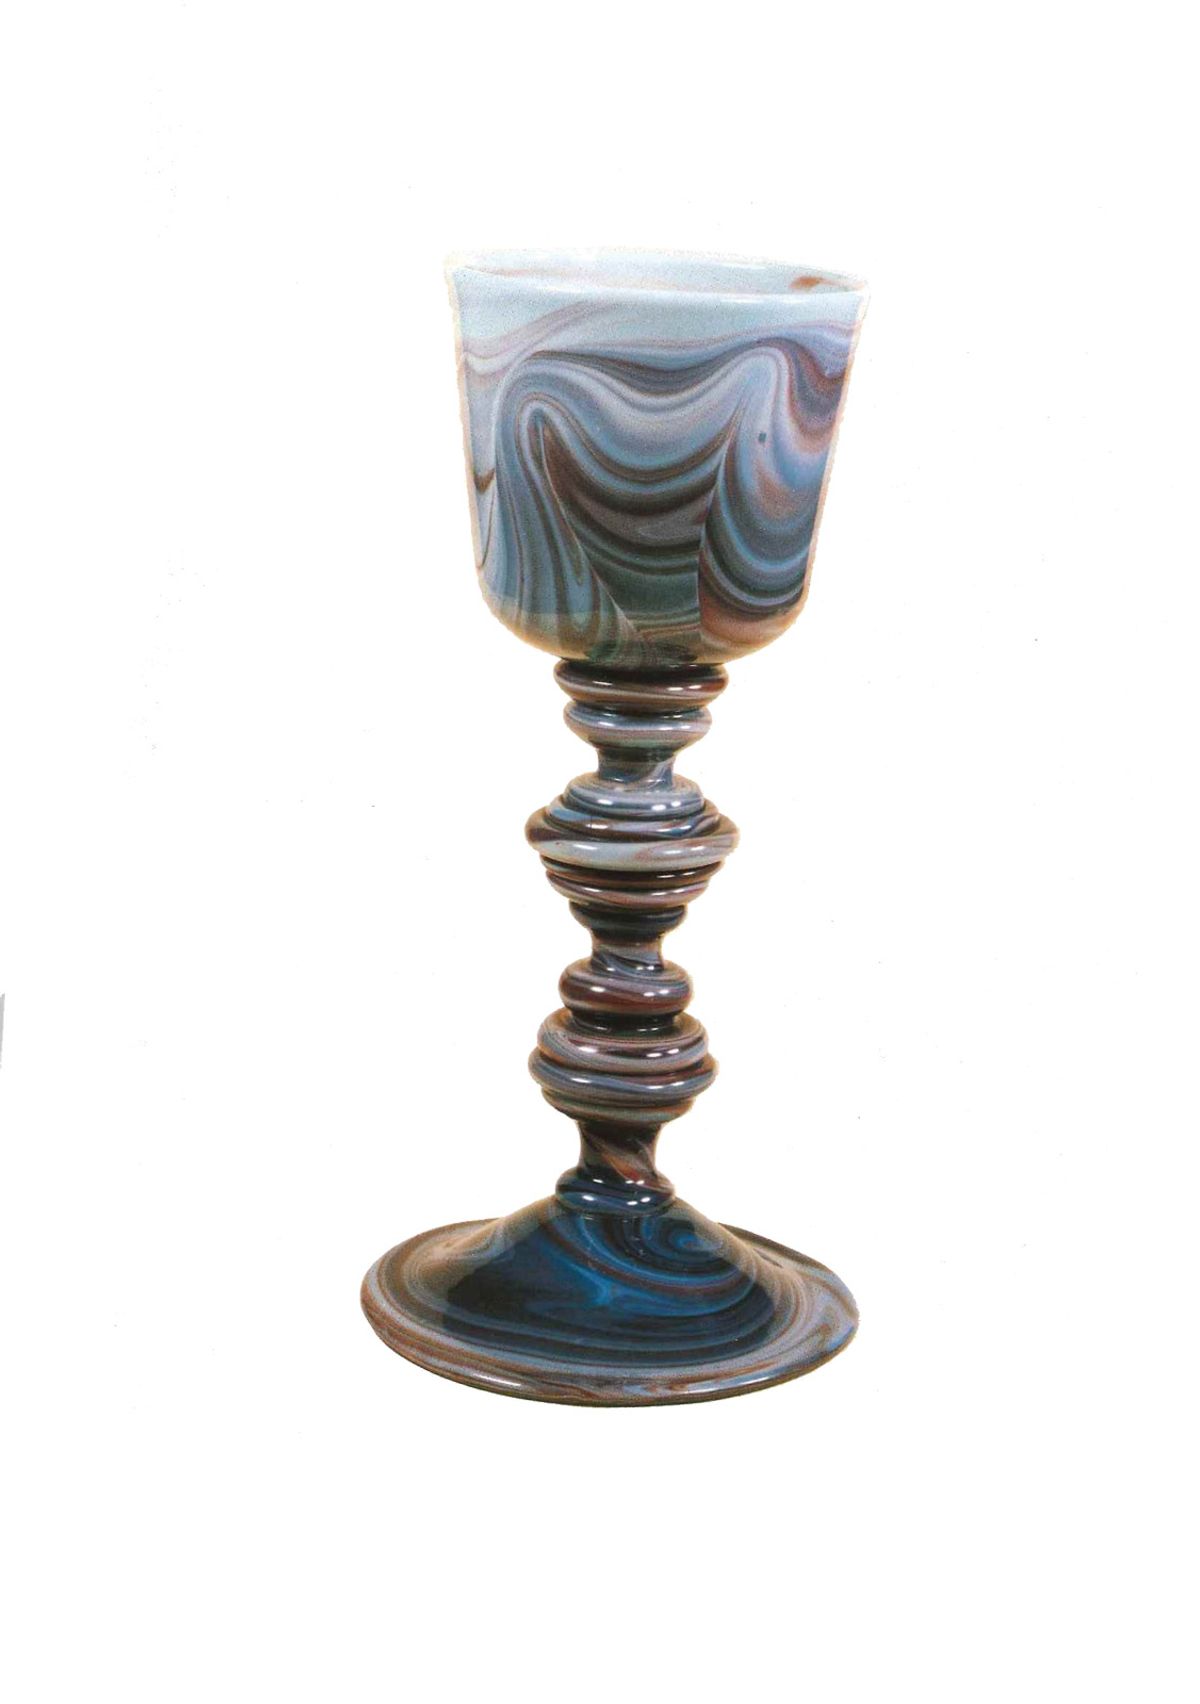 The goblet was stolen from Berlin’s Märkisches Museum at the end of the First World War 